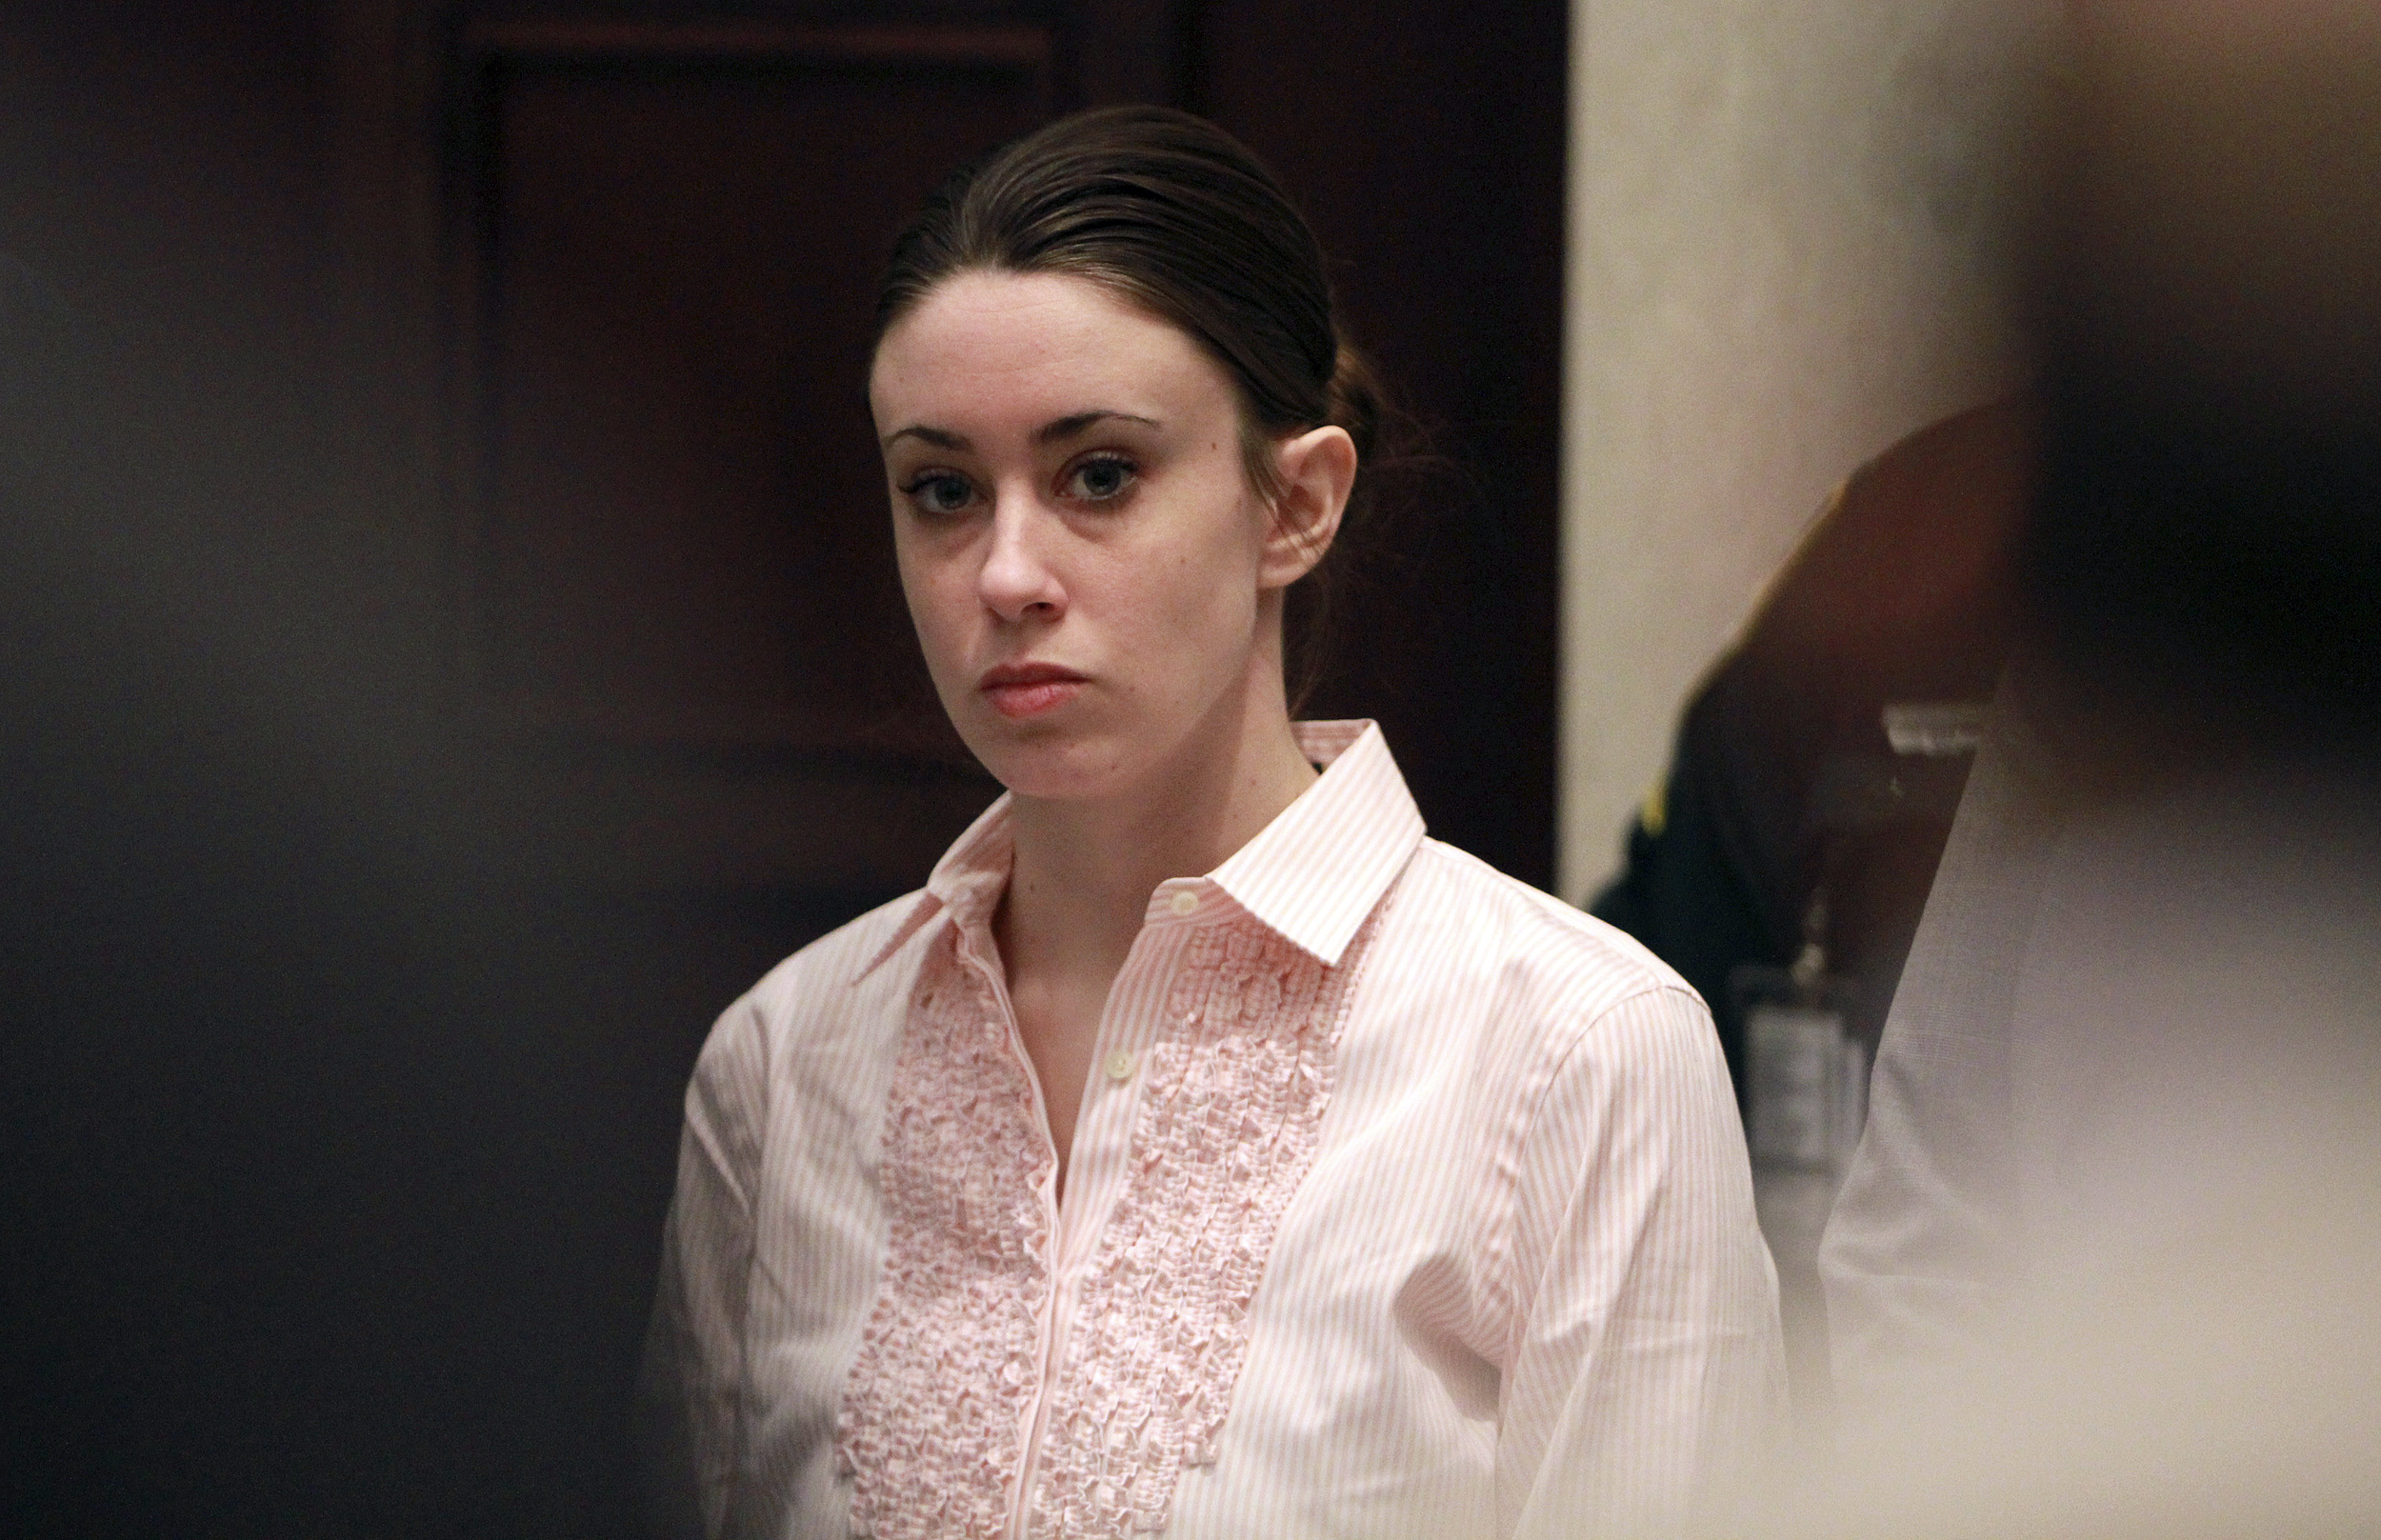 where is casey anthony now